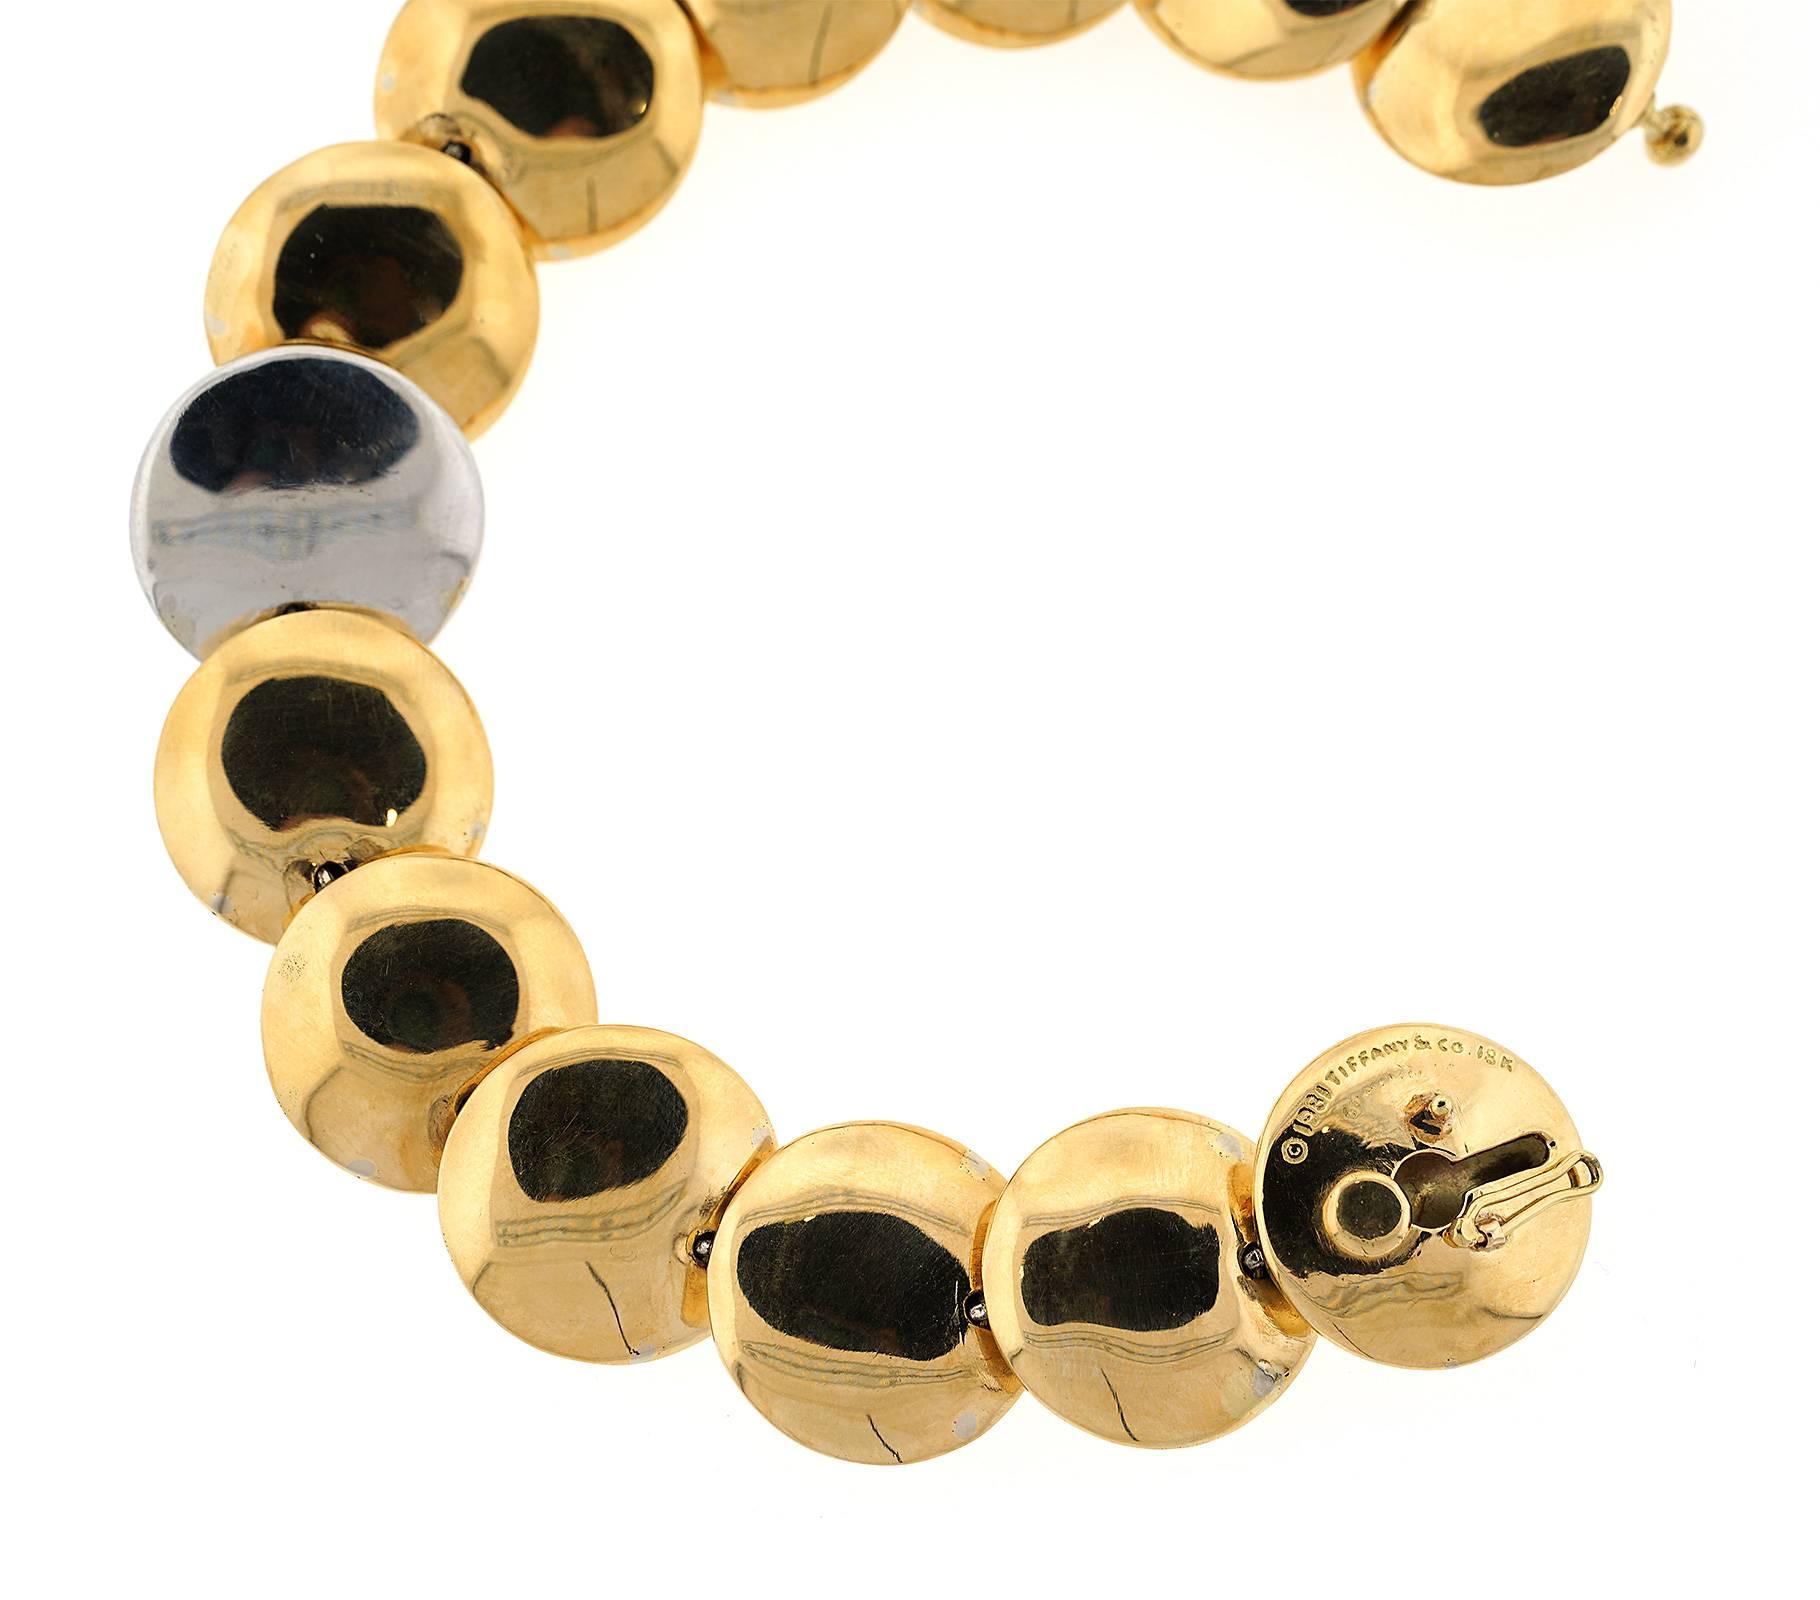 The bracelet is 18mm wide, 7.5 inches in length, made of yellow gold and platinum, and weighs 34.6 DWT (approx. 53.81 grams). It also has 39 round G-color, VS-clarity diamonds weighing 0.55 CTTW, and 64 single cut G-color, VS-clarity diamonds